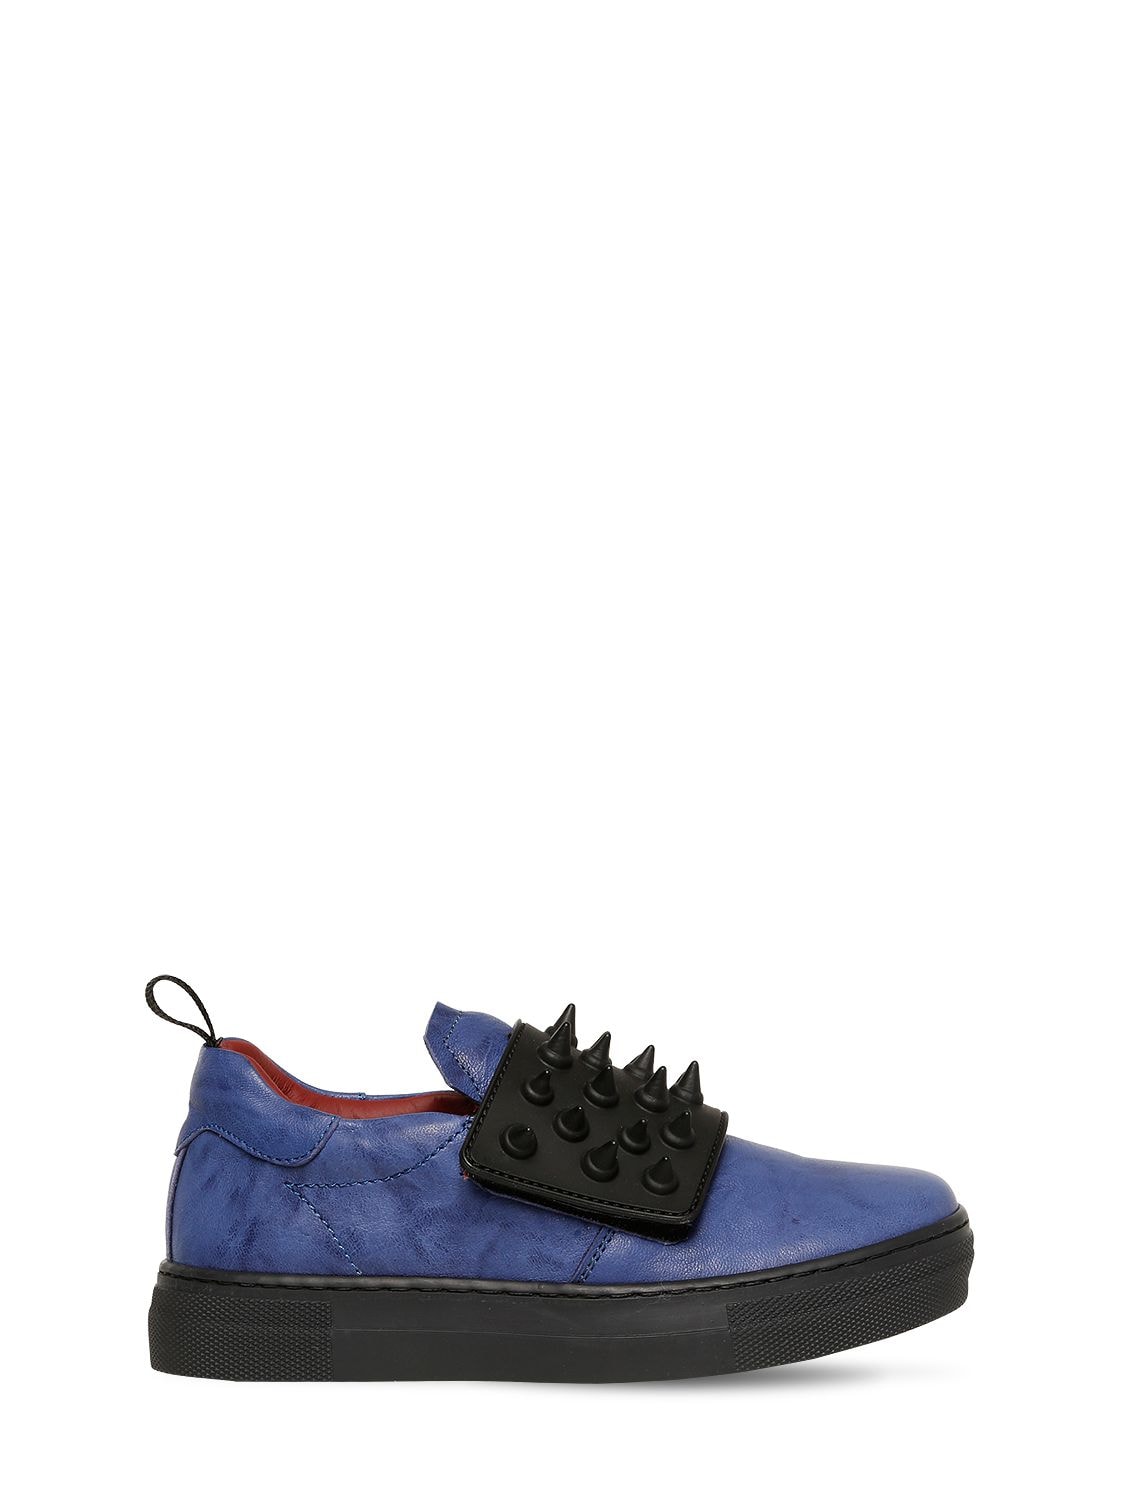 Am 66 Kids' Spiked Leather Slip-on Sneakers In Blue,black